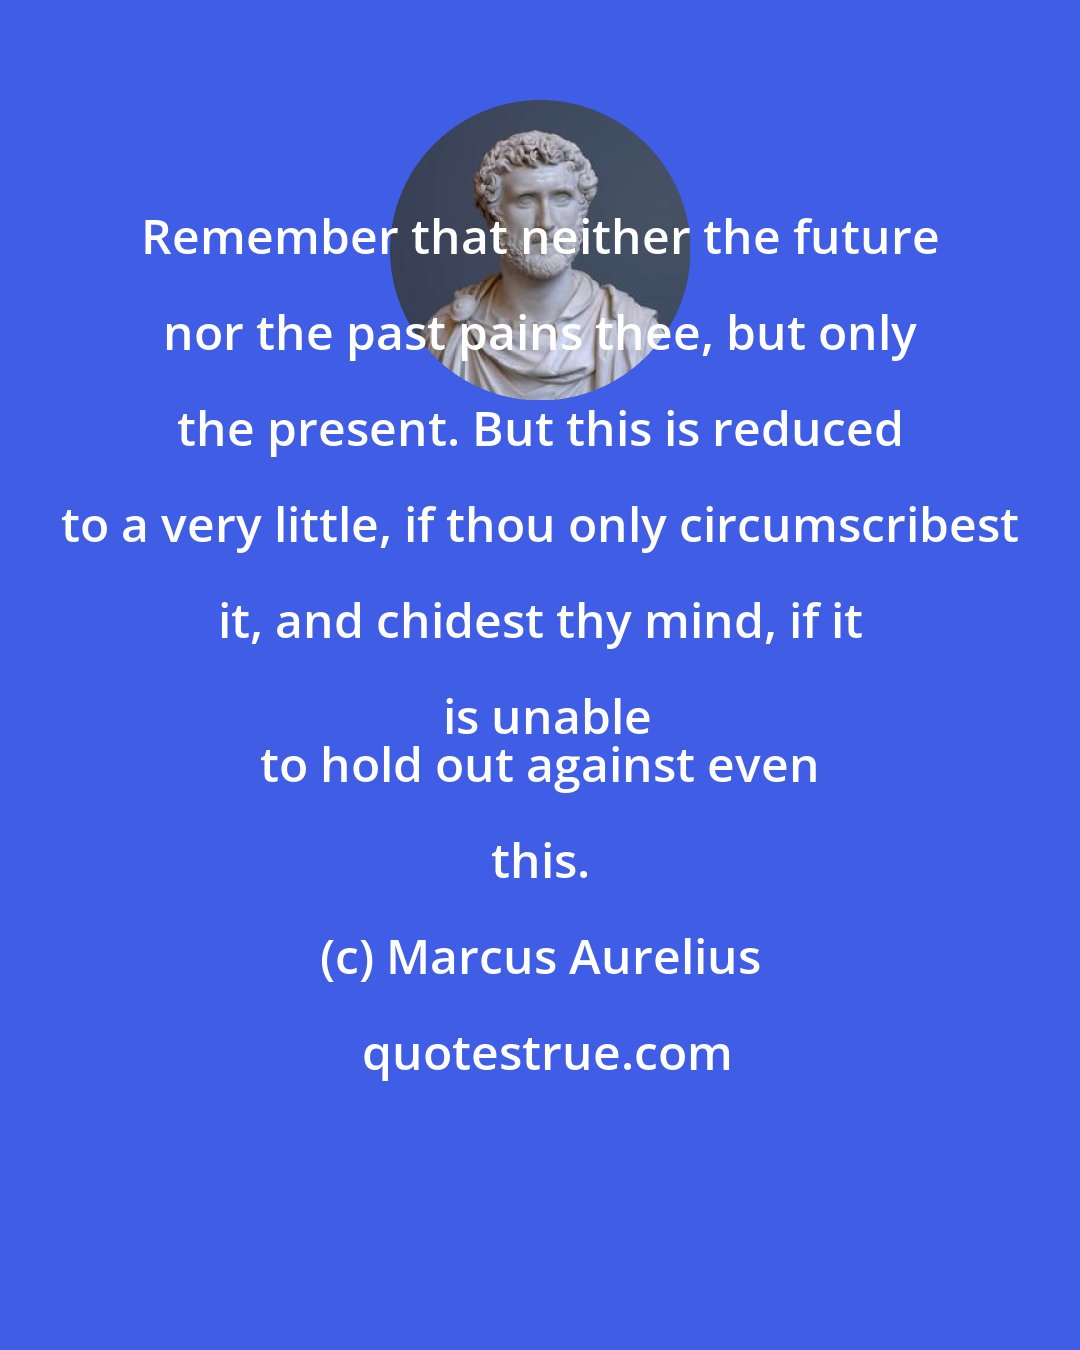 Marcus Aurelius: Remember that neither the future nor the past pains thee, but only the present. But this is reduced to a very little, if thou only circumscribest it, and chidest thy mind, if it is unable
 to hold out against even this.